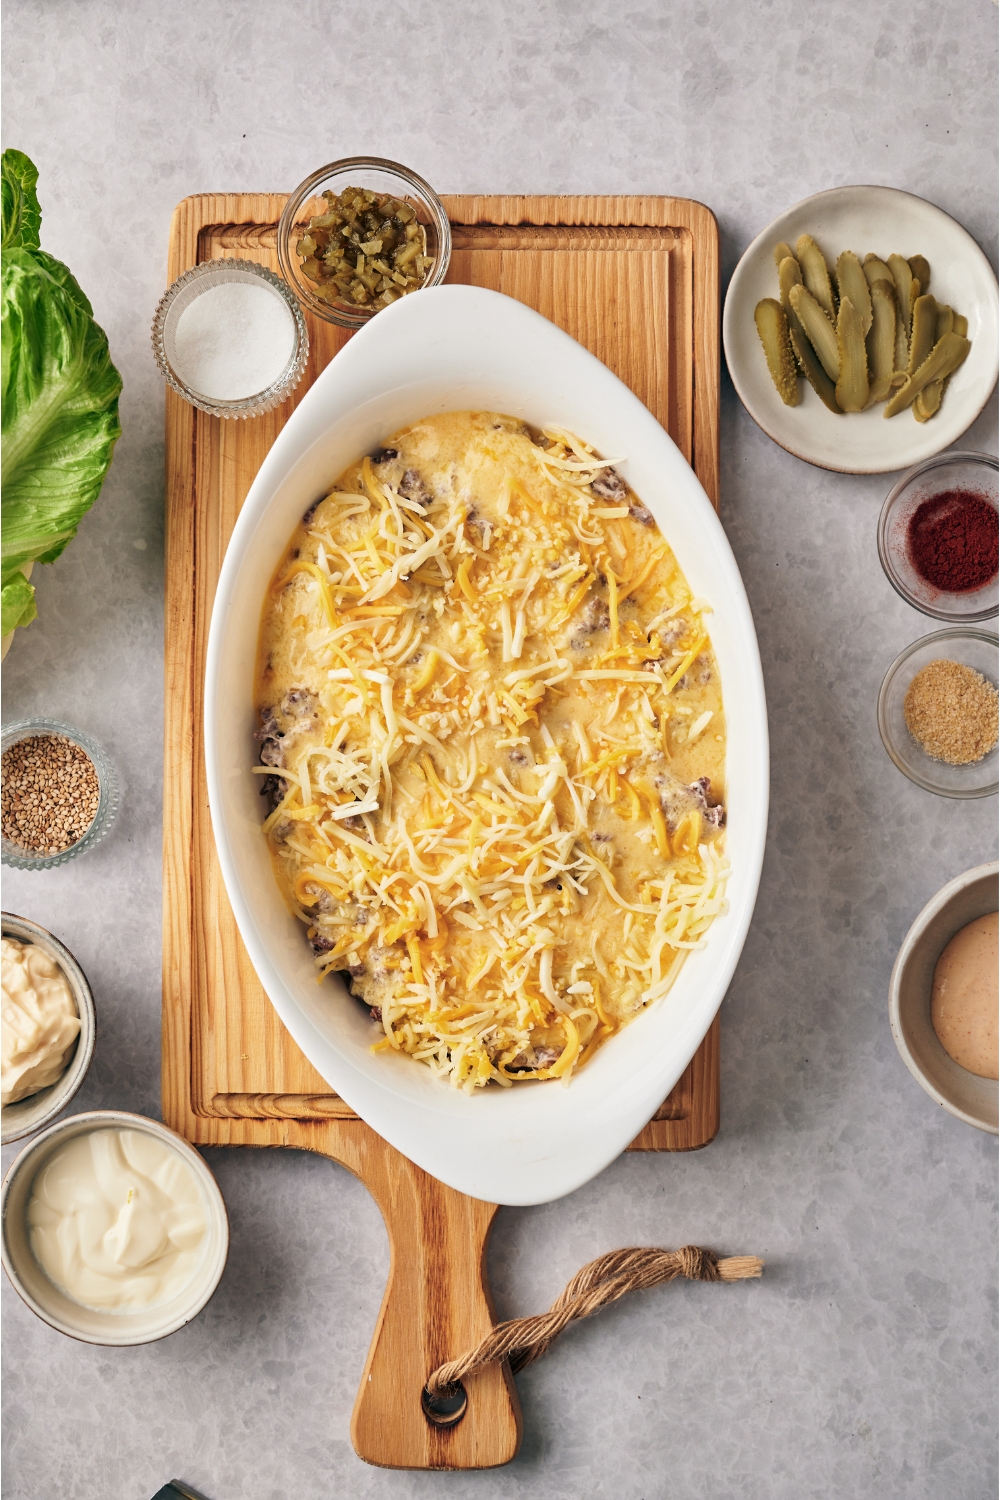 White baking dish filled with cooked ground beef, a creamy sauce poured over top, and a layer of shredded cheese.